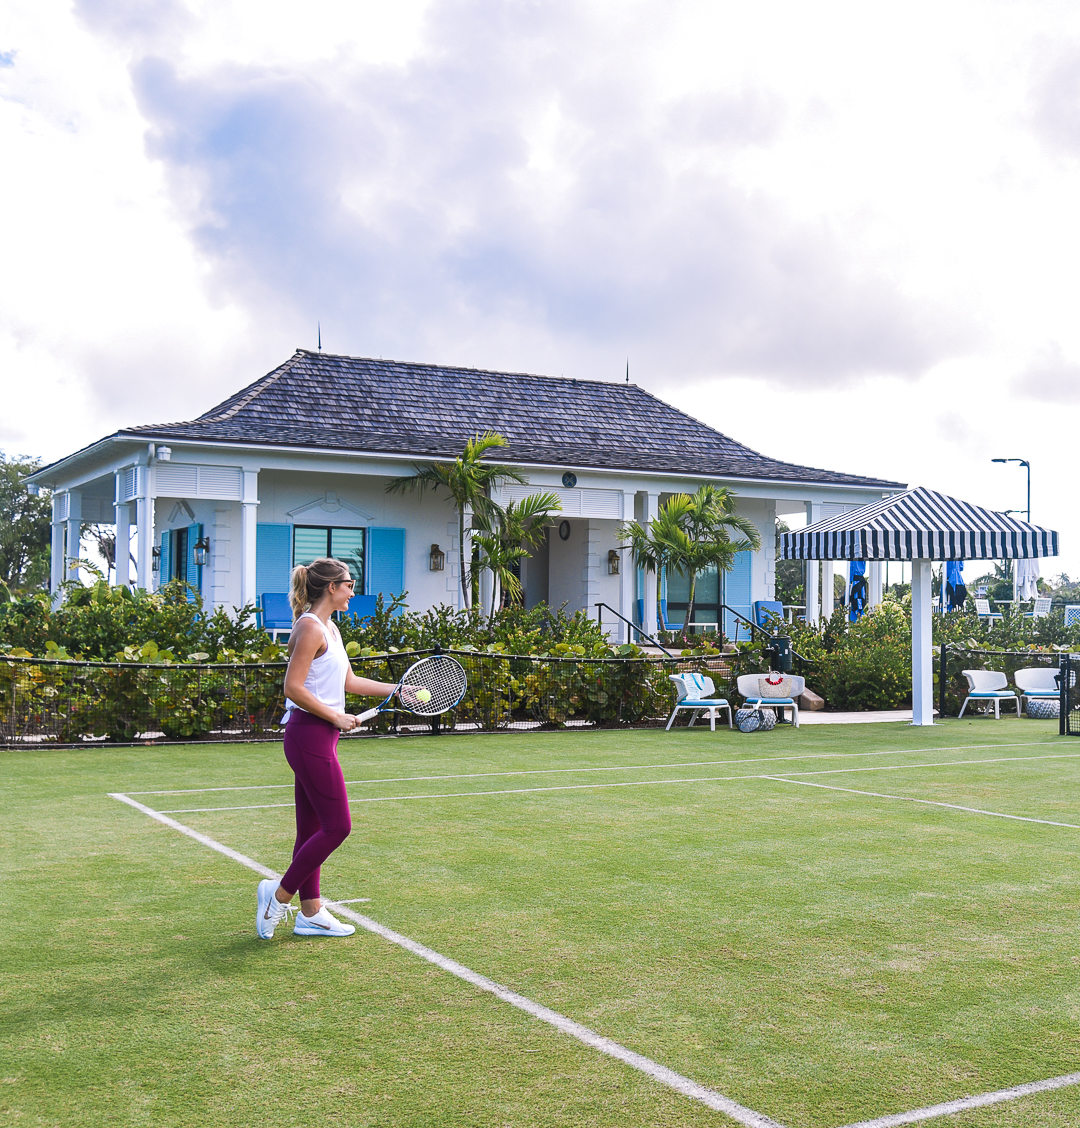 playing tennis on grass at the racquet club in the bahamas - baha mar resort review in the bahamas by popular Chicago travel blogger Visions of Vogue